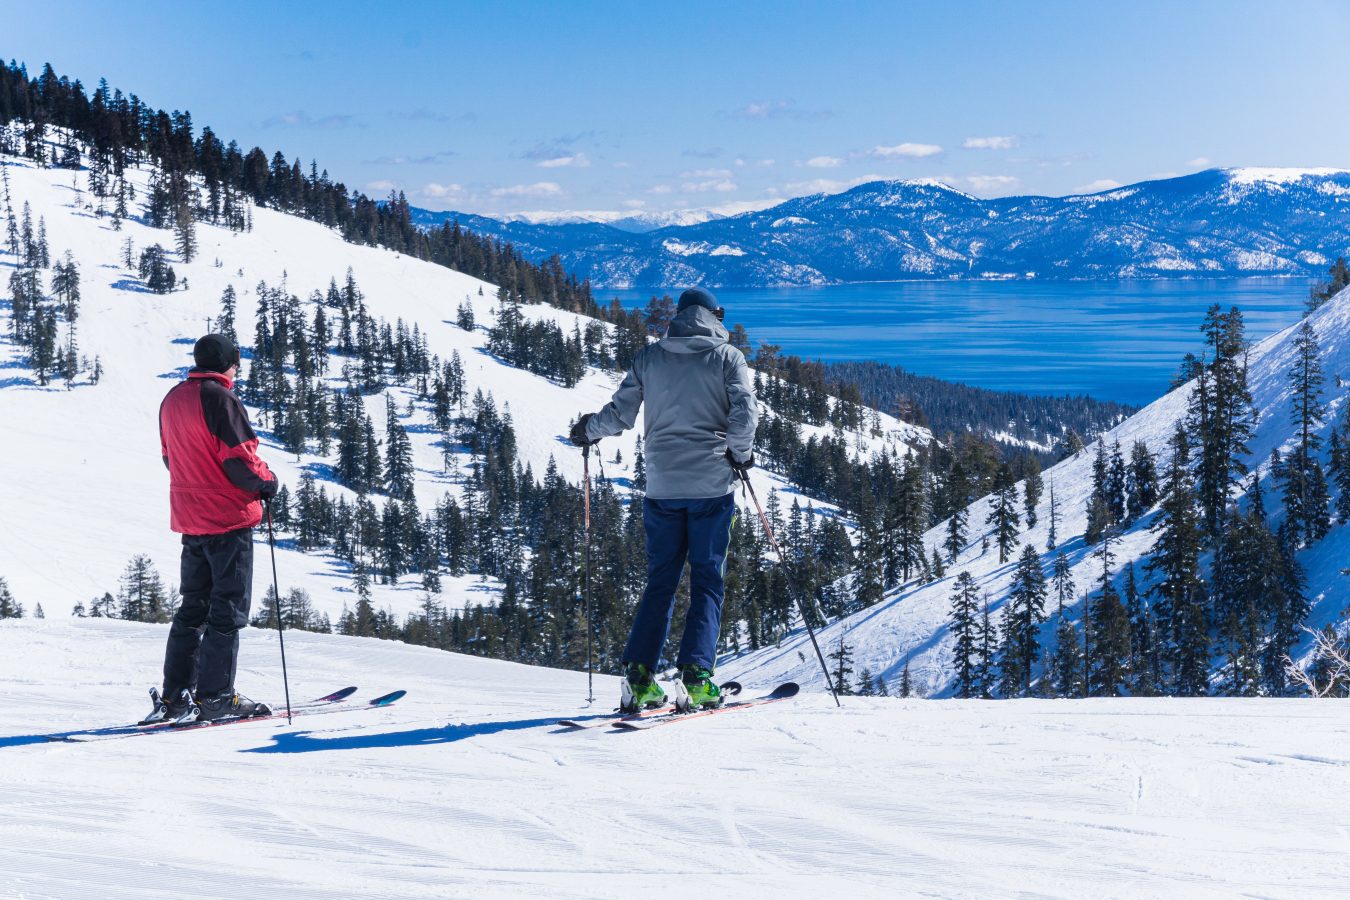 Two guys on skis look out over Lake Tahoe and the surrounding mountains on a sunny spring day.